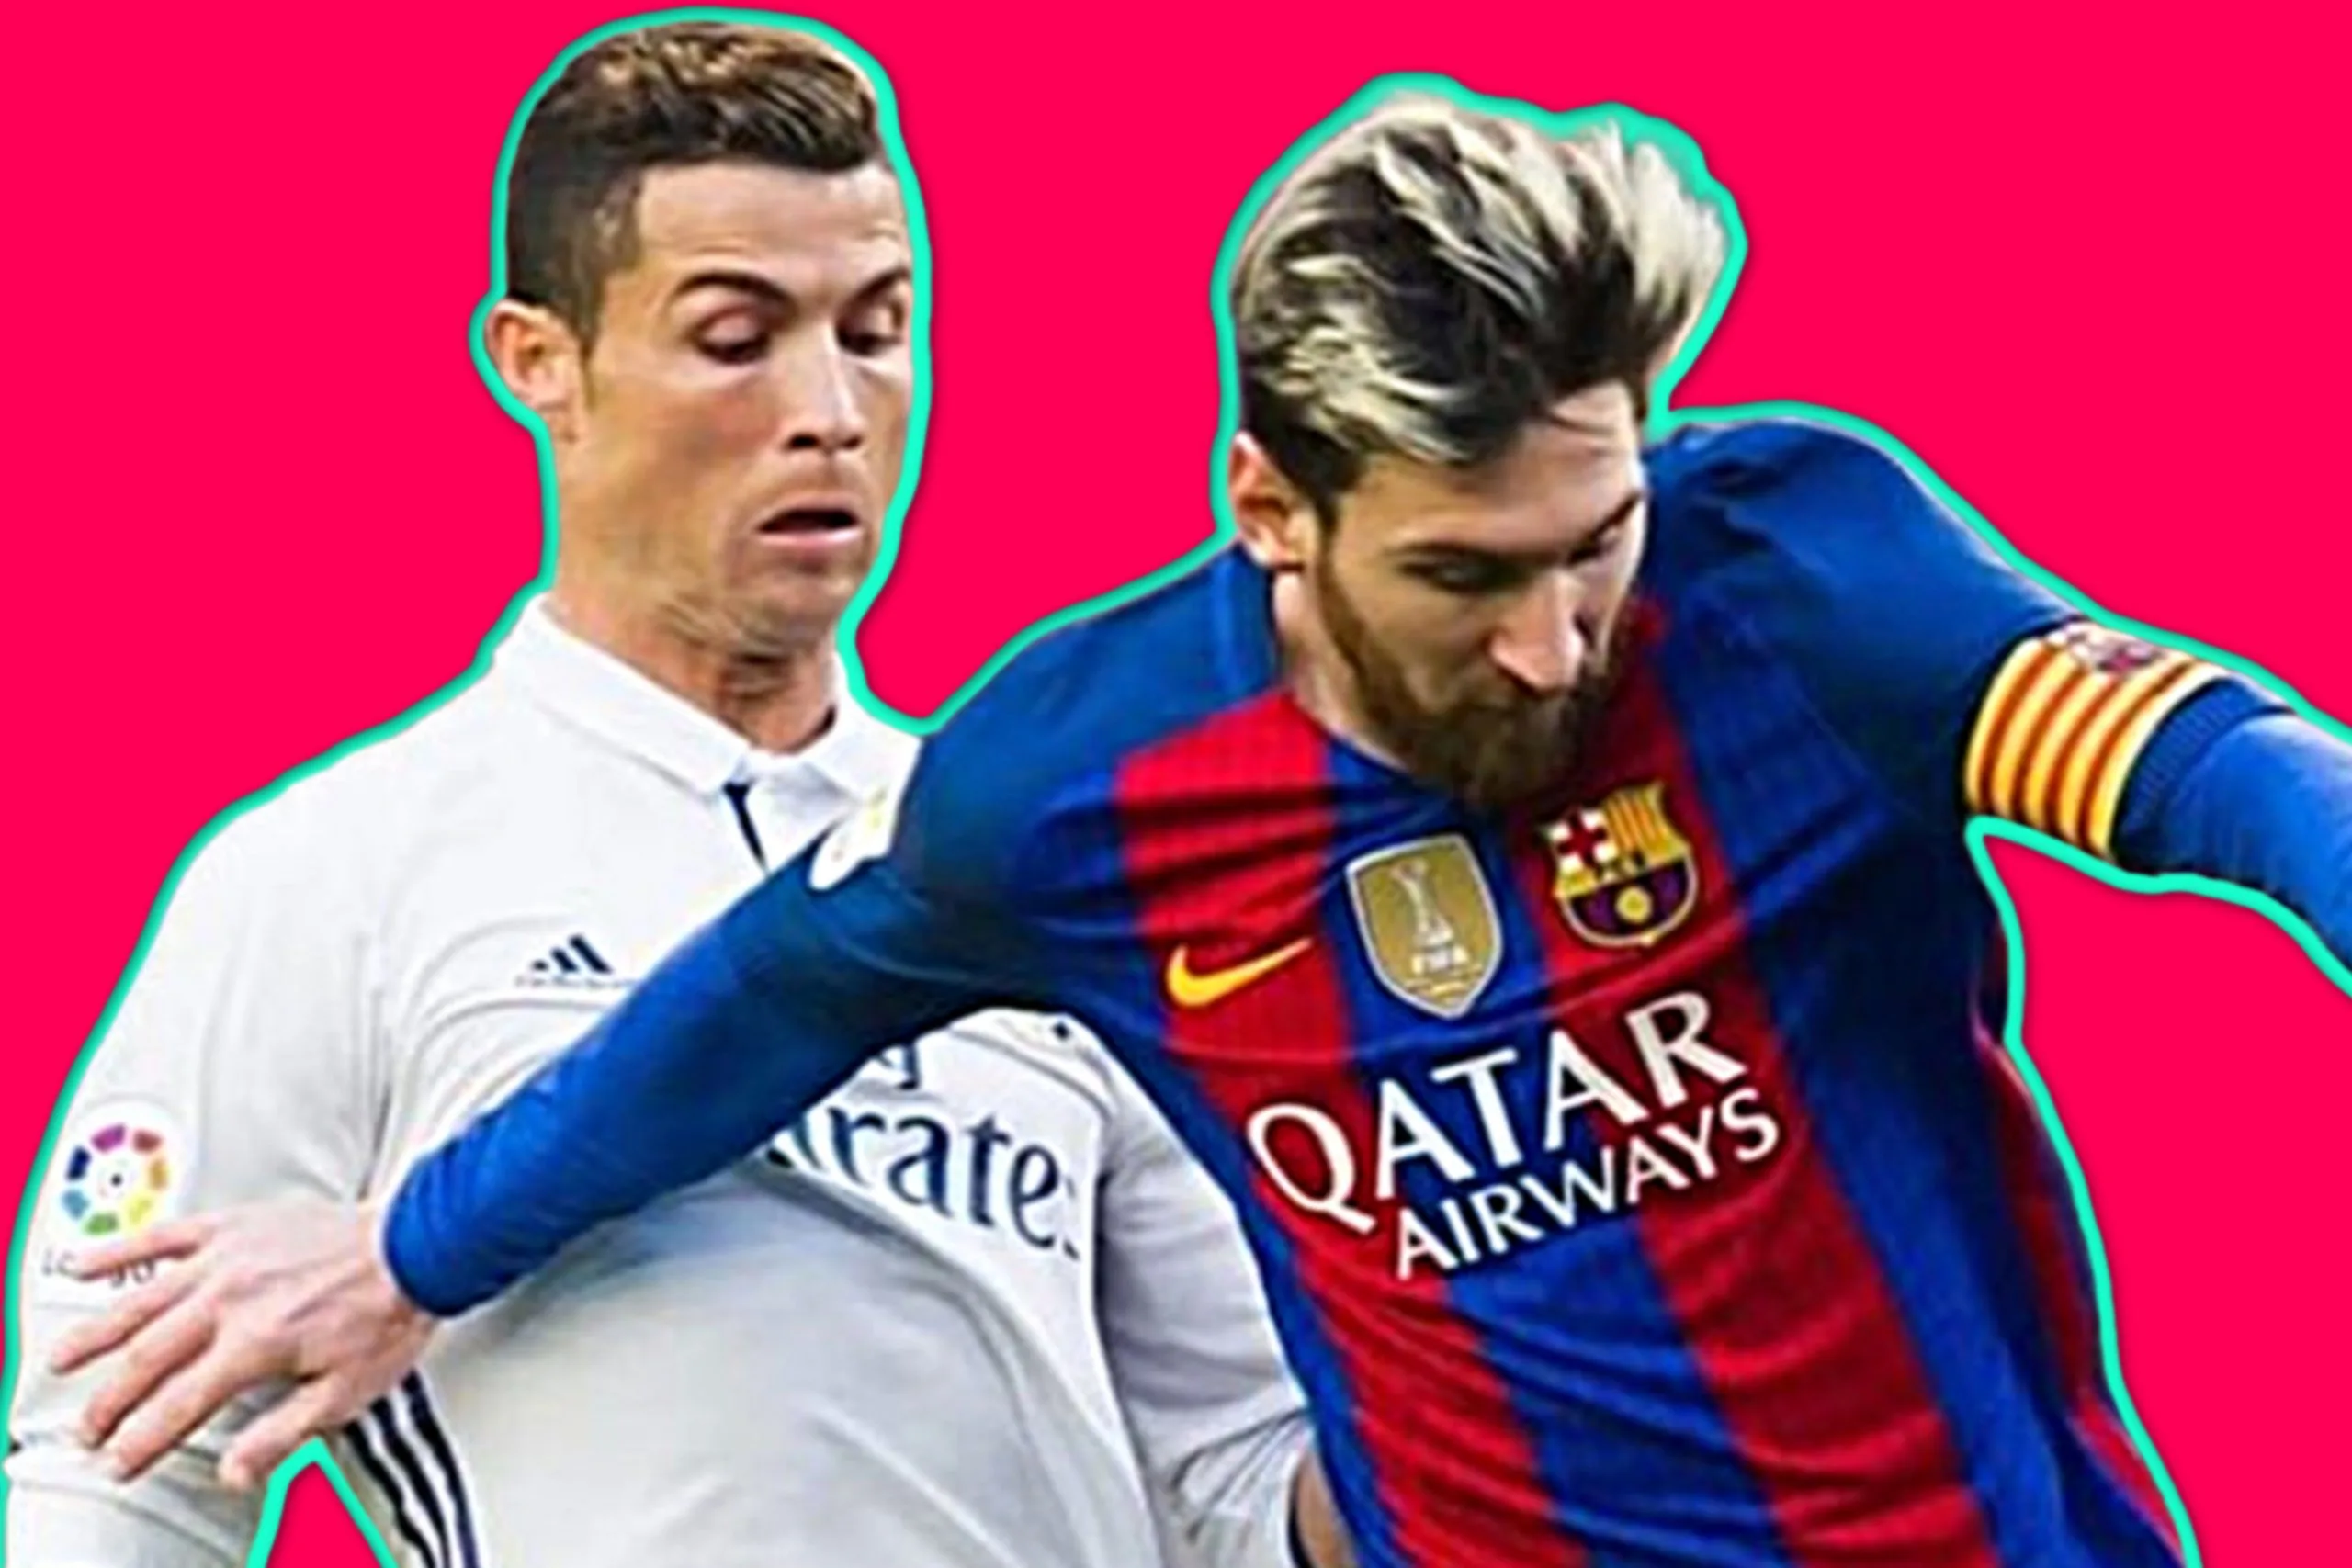 Cristiano Ronaldo and Lionel Messi during a match between Real Madrid and Barcelona